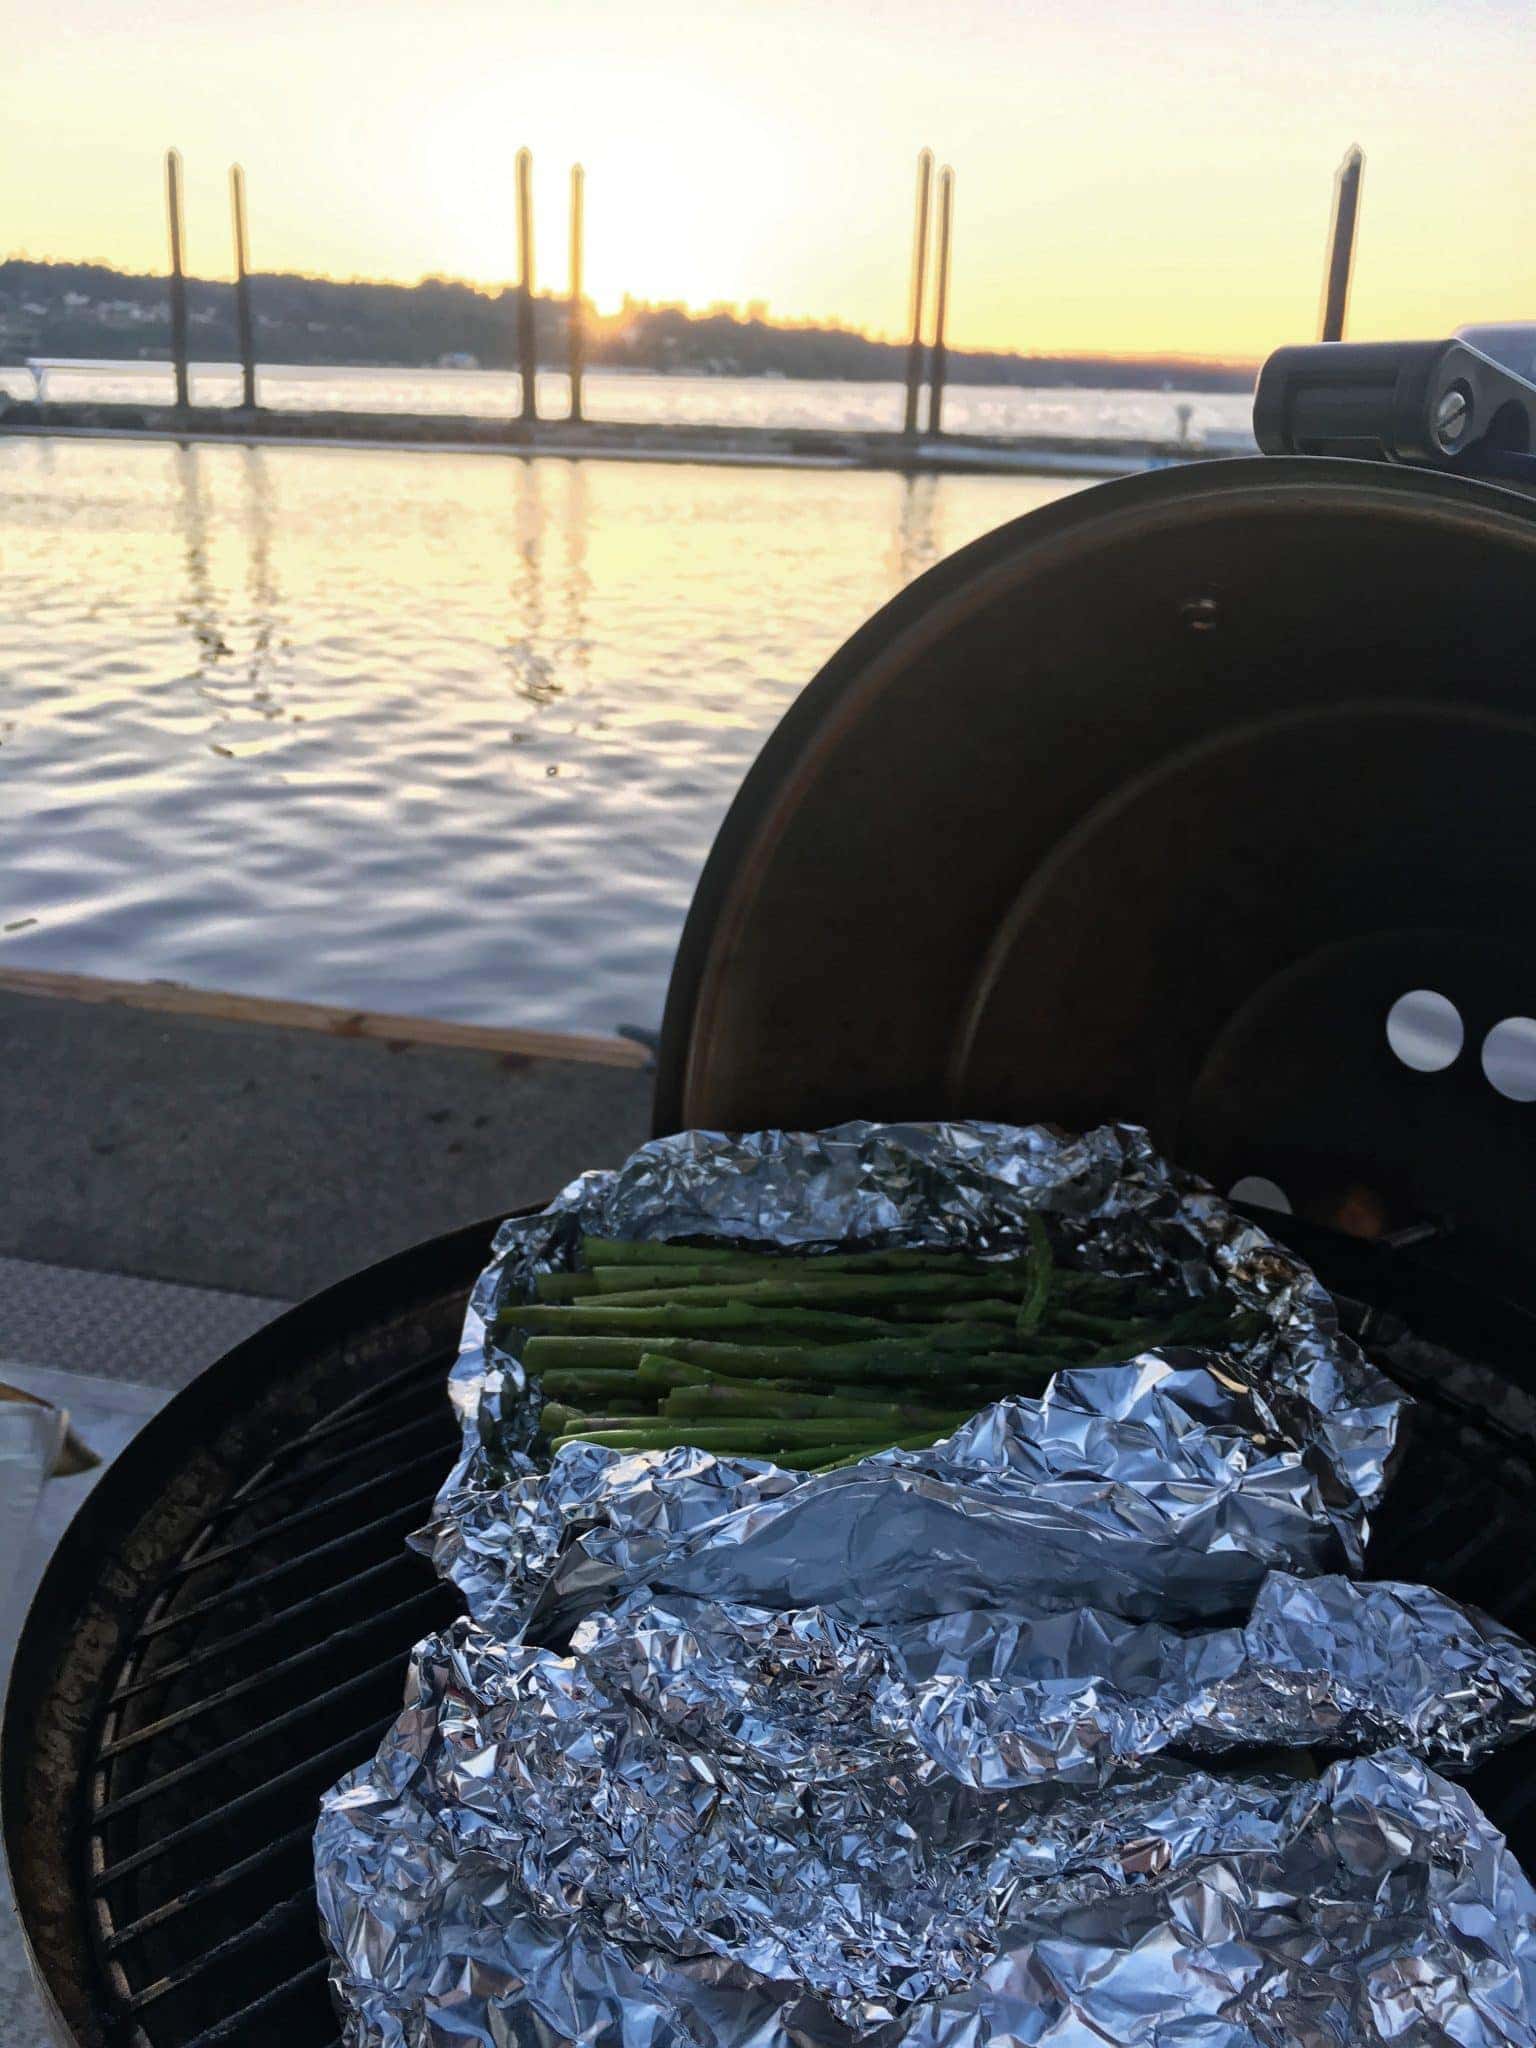 Dinner on the BBQ